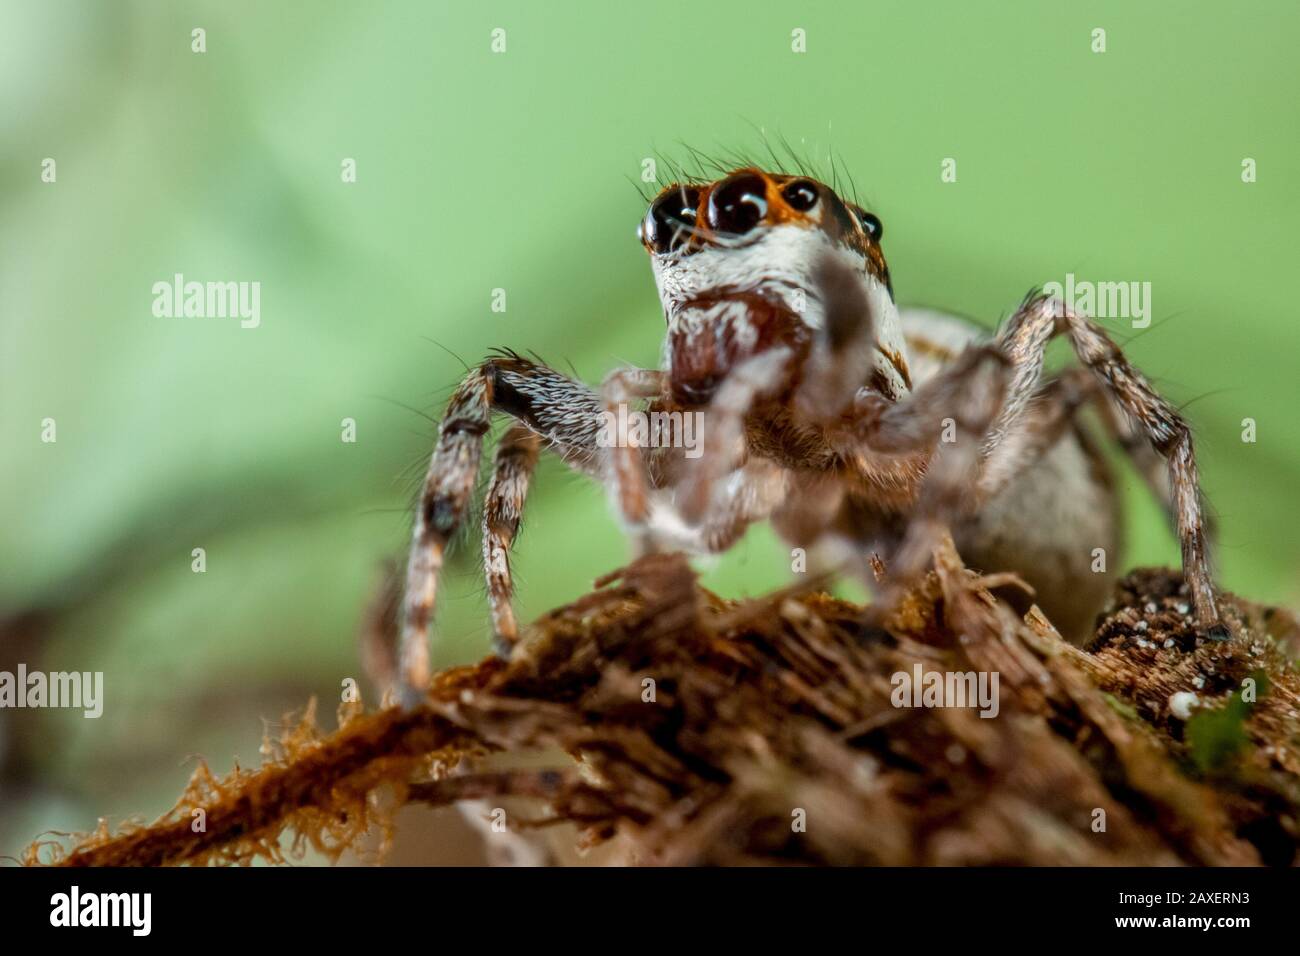 Detailed portrait of a jumping spider, close-up with the salticidae eyes Stock Photo